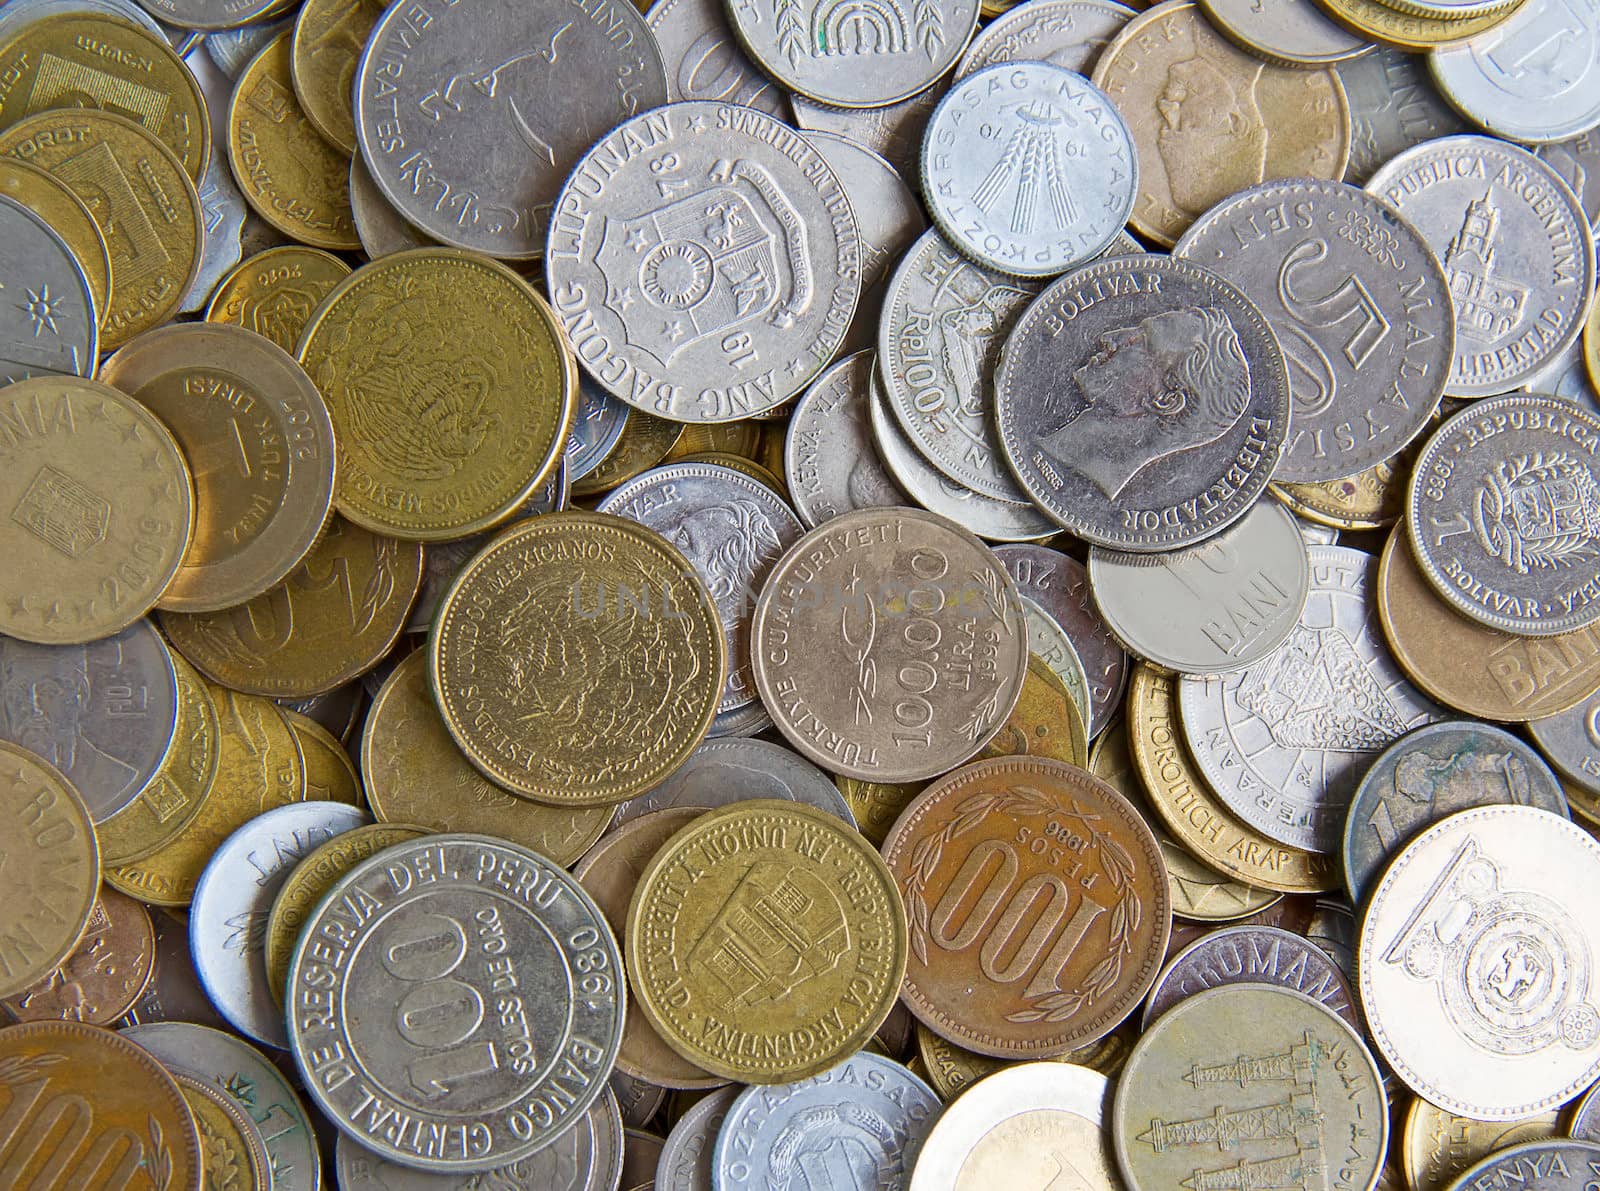 Collection of the old circulated coins